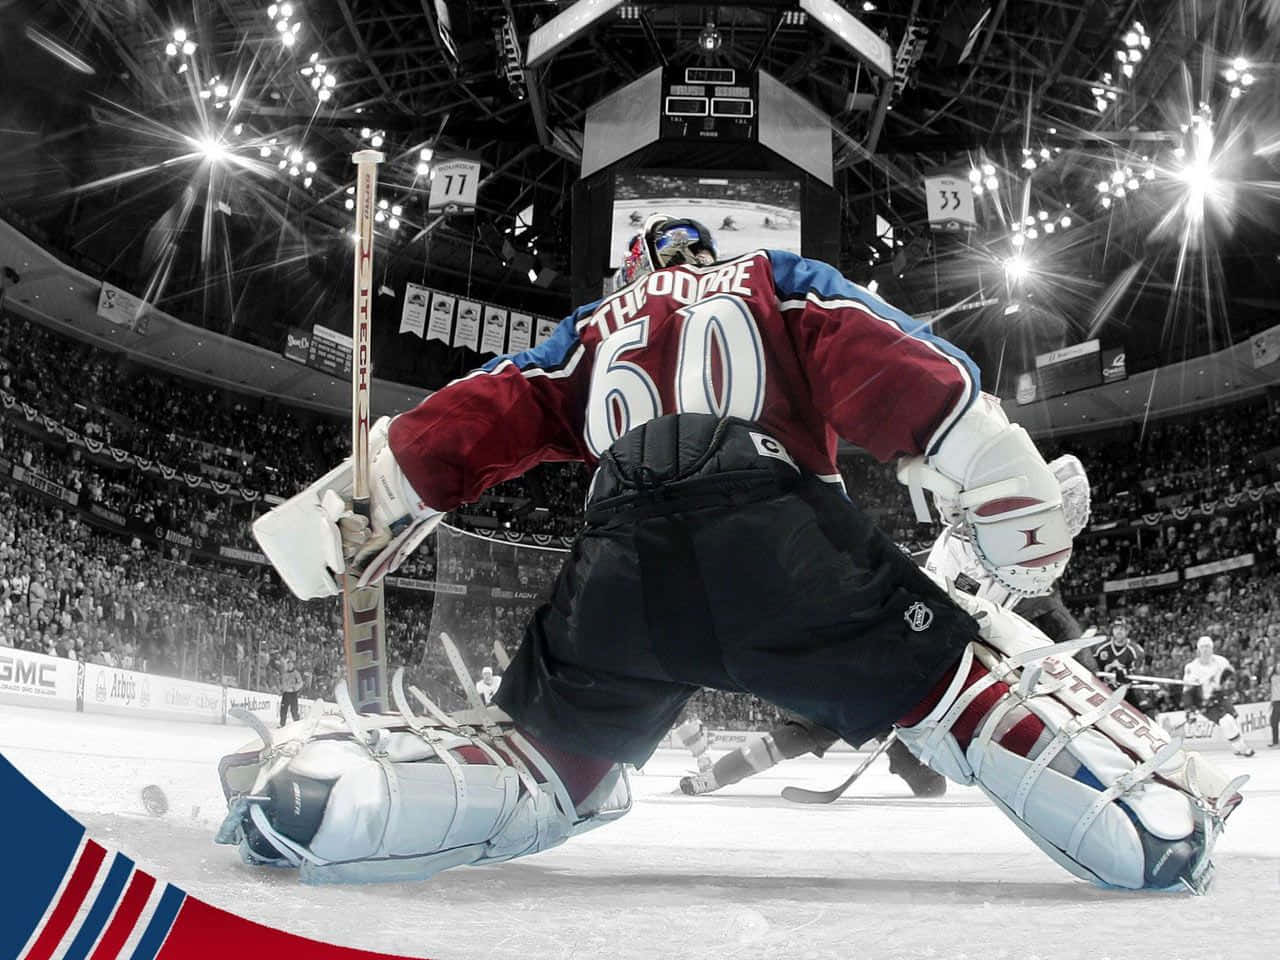 A vibrant, energetic representation of the thrill of hockey